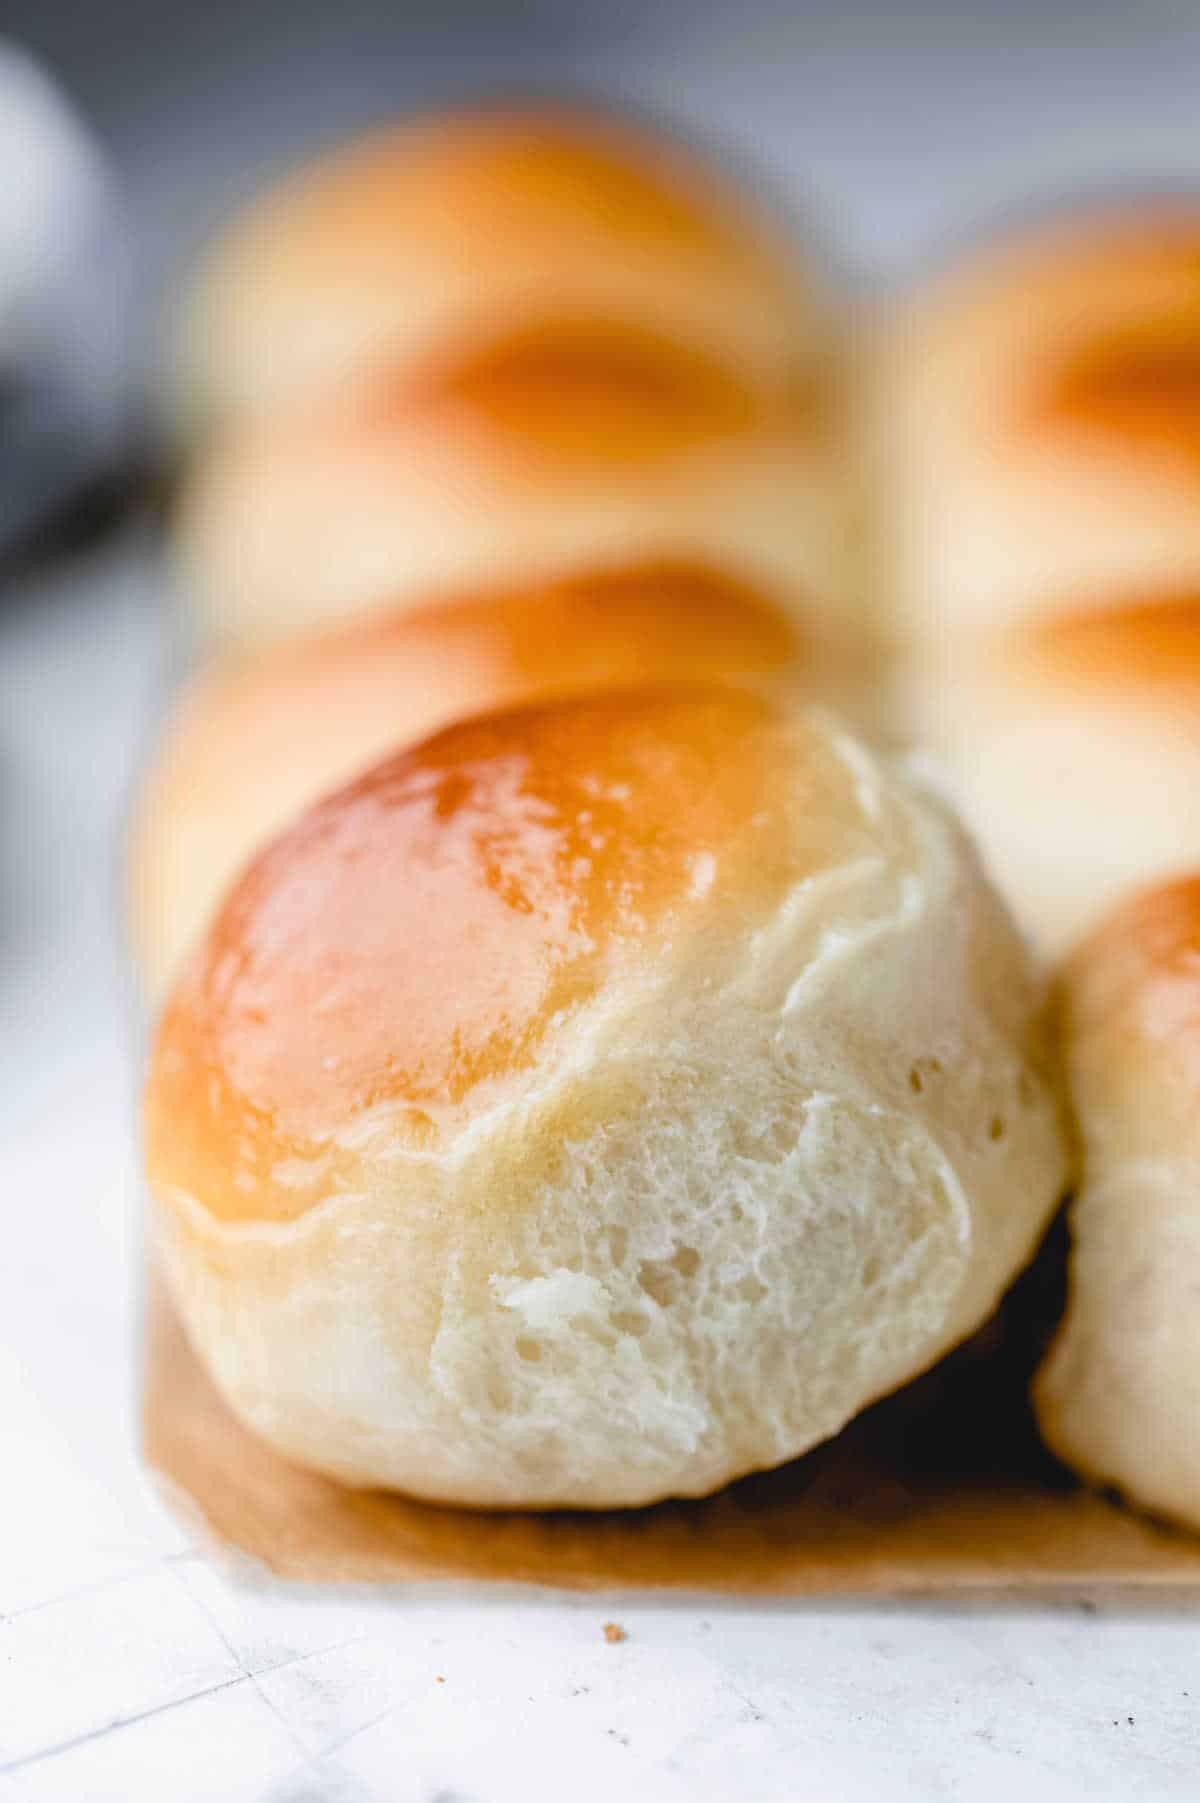 A Hawaiian sweet roll at an angle against a row of rolls. 